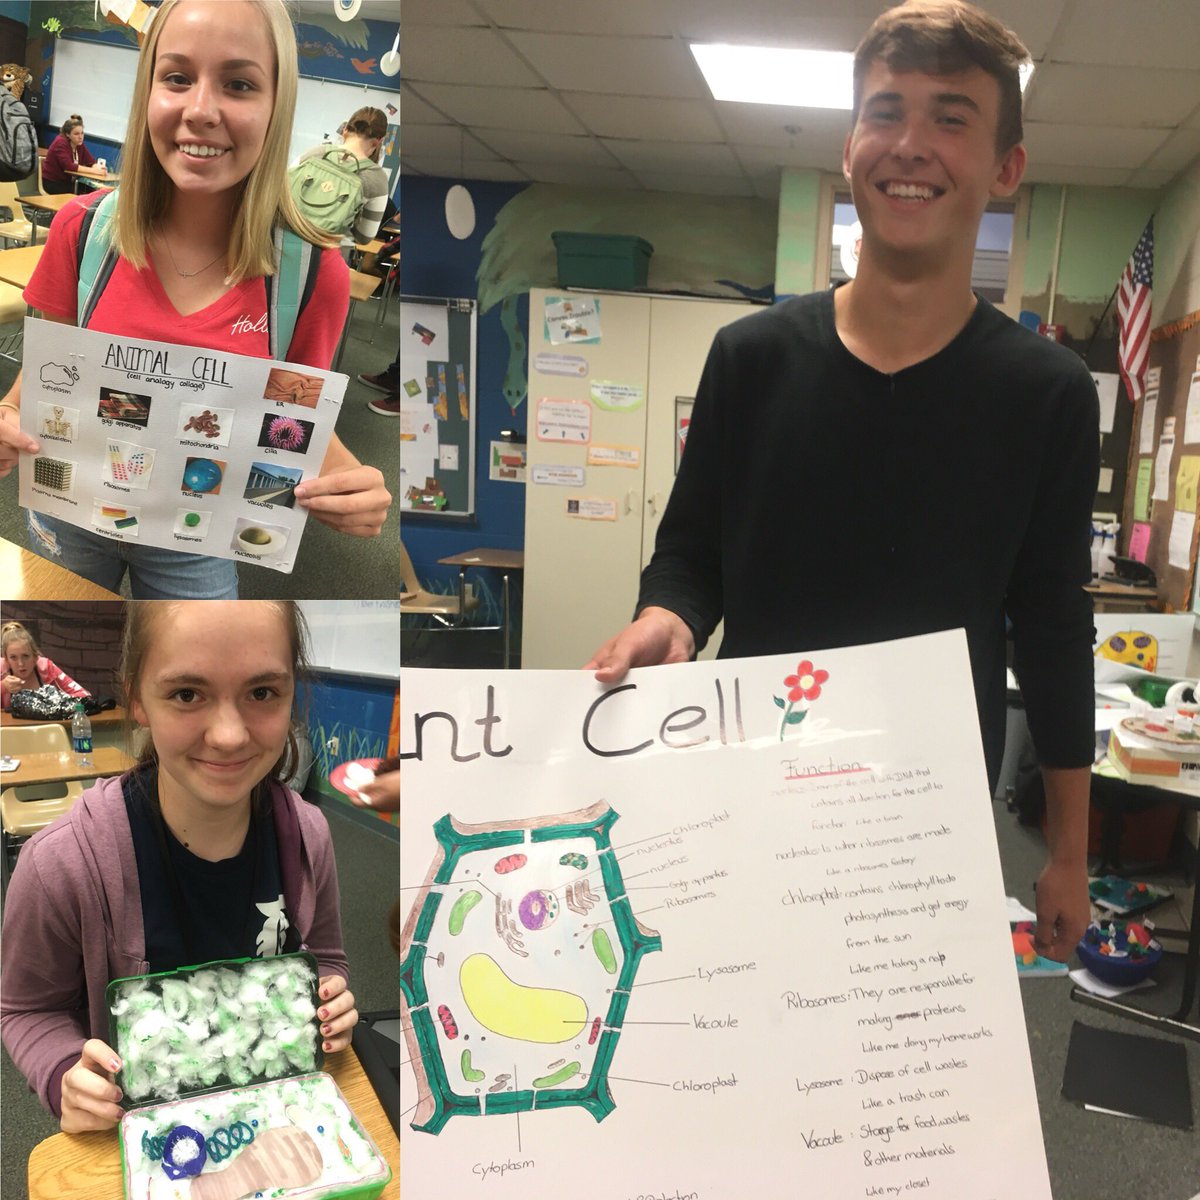 Just a sampling of some of the cell projects turned in today in #WCHSBio! Poems, 3D diagrams (some even edible!), and analogy collages.  #WCSmission #CreativeStudents